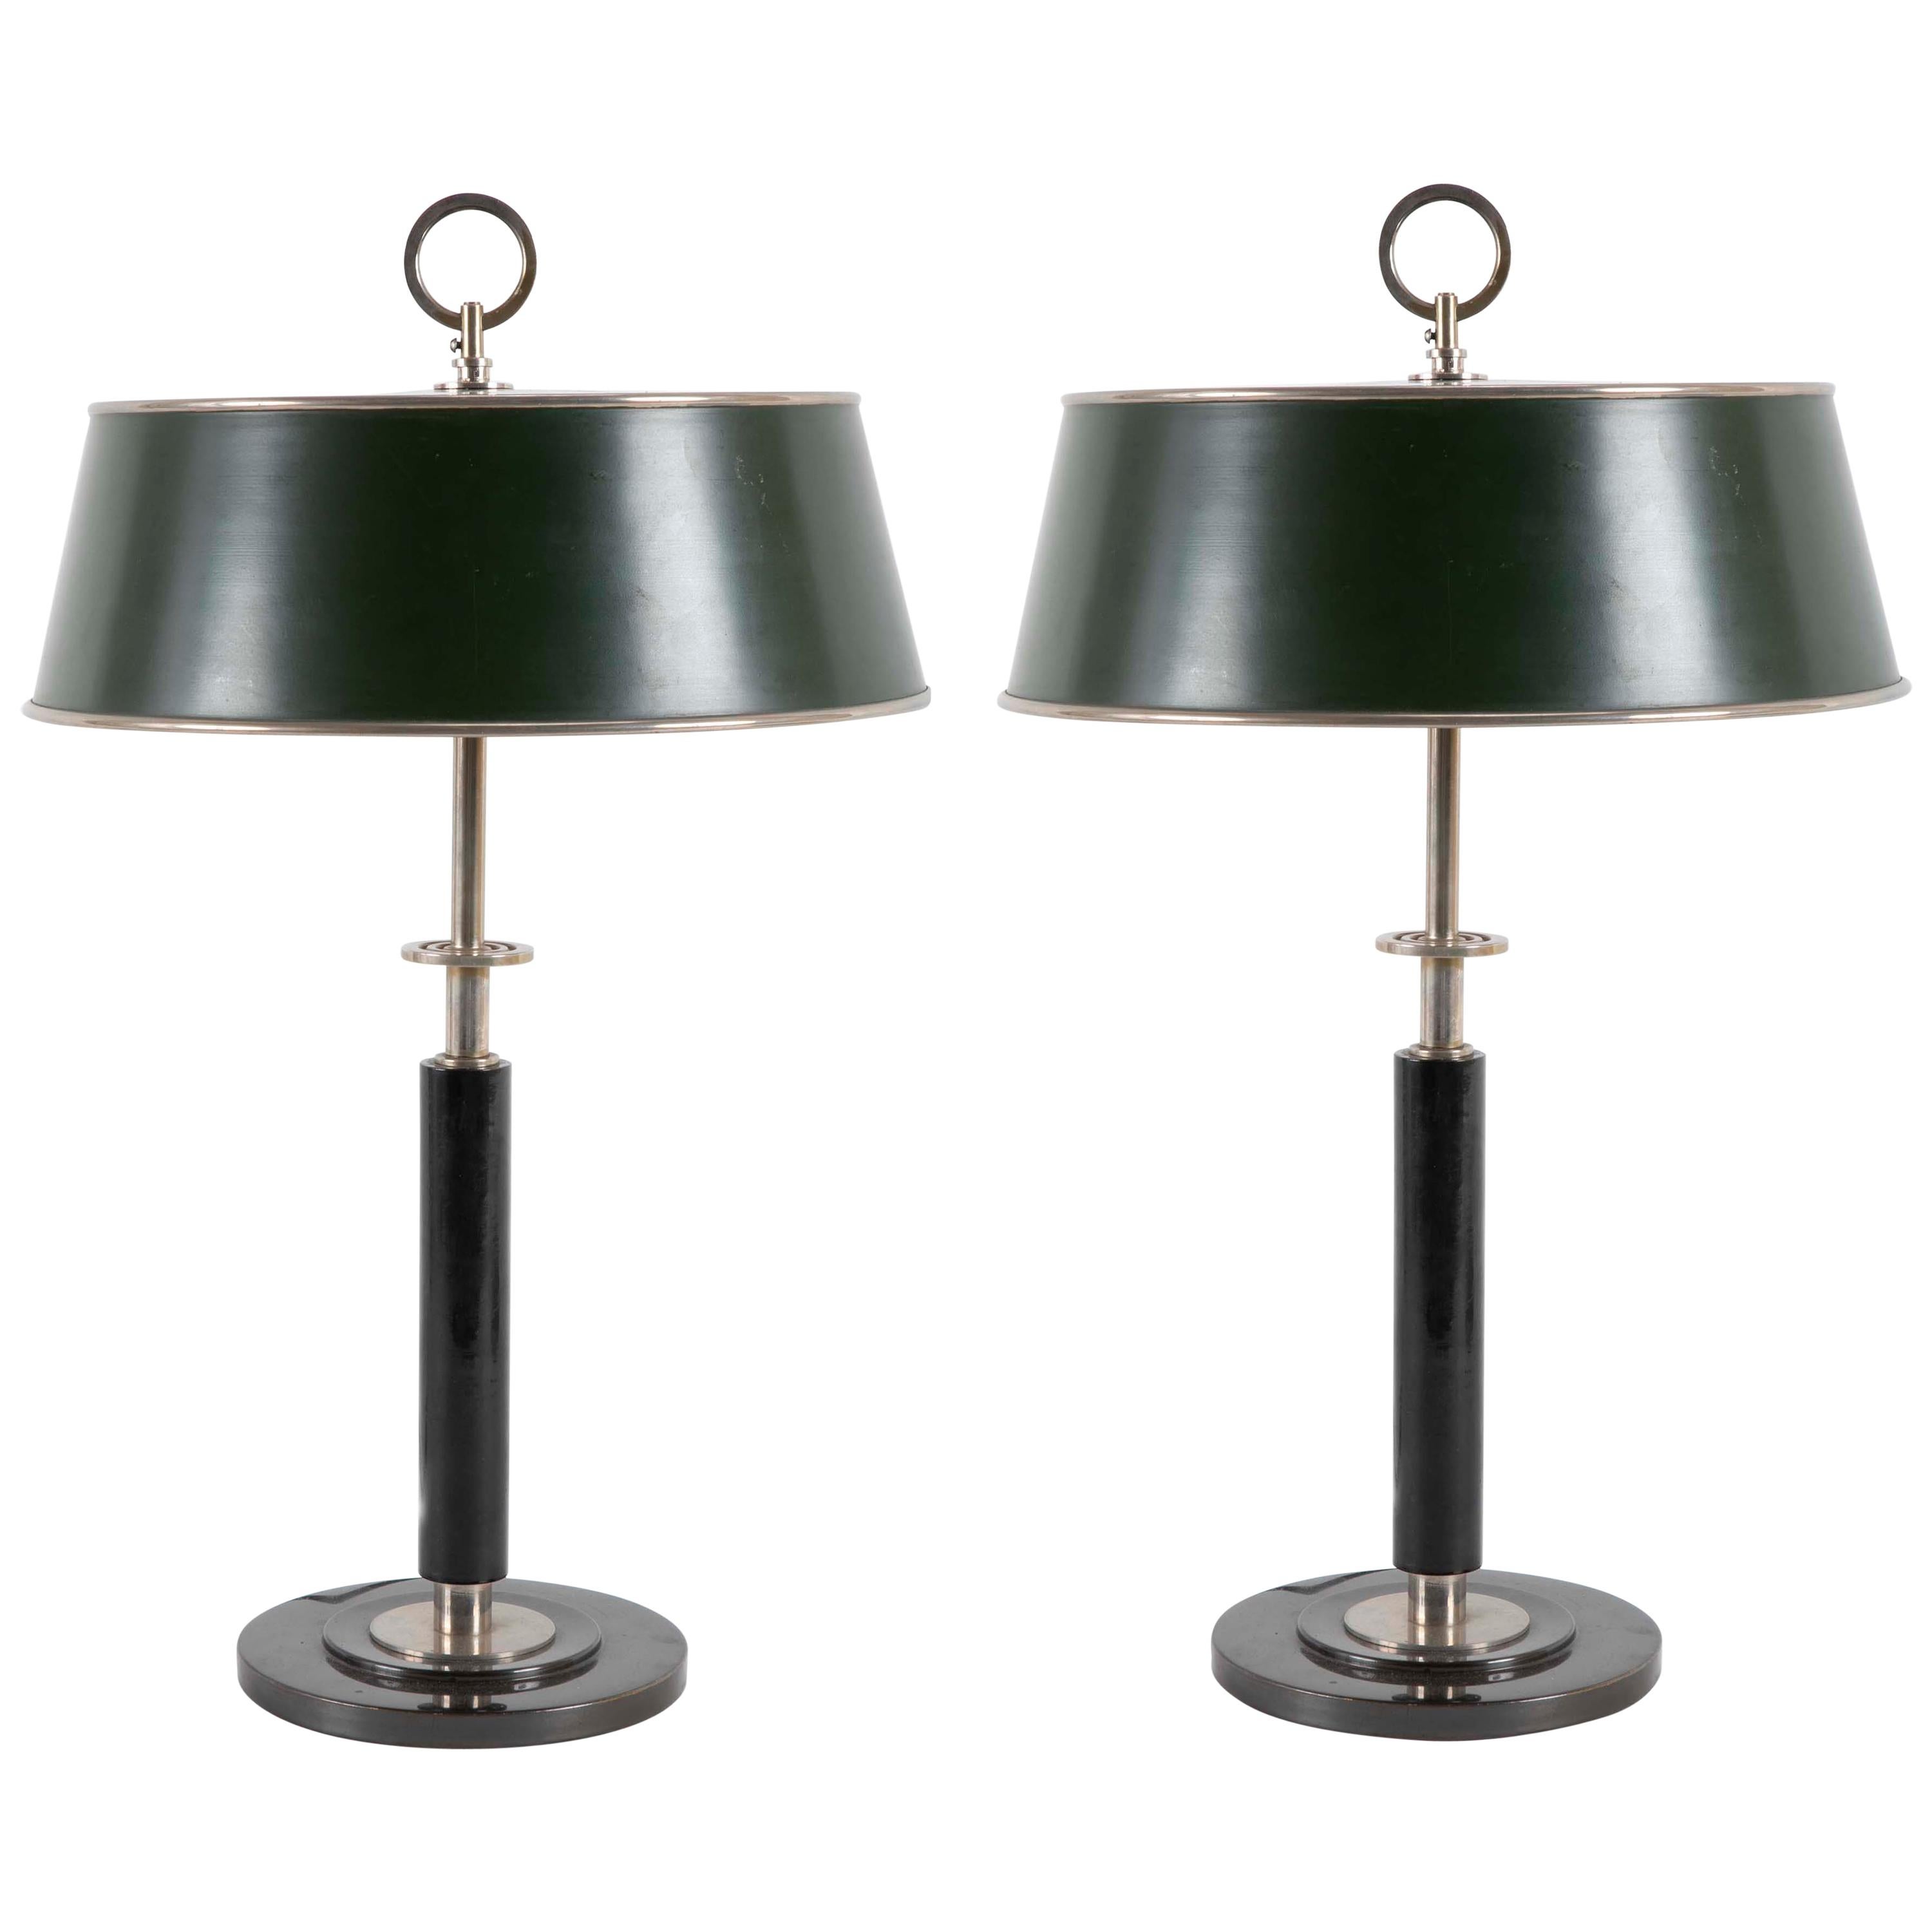 A Pair of Modern Swedish Lamps Designed by Erik Tidstrand Produced, circa 1932 For Sale